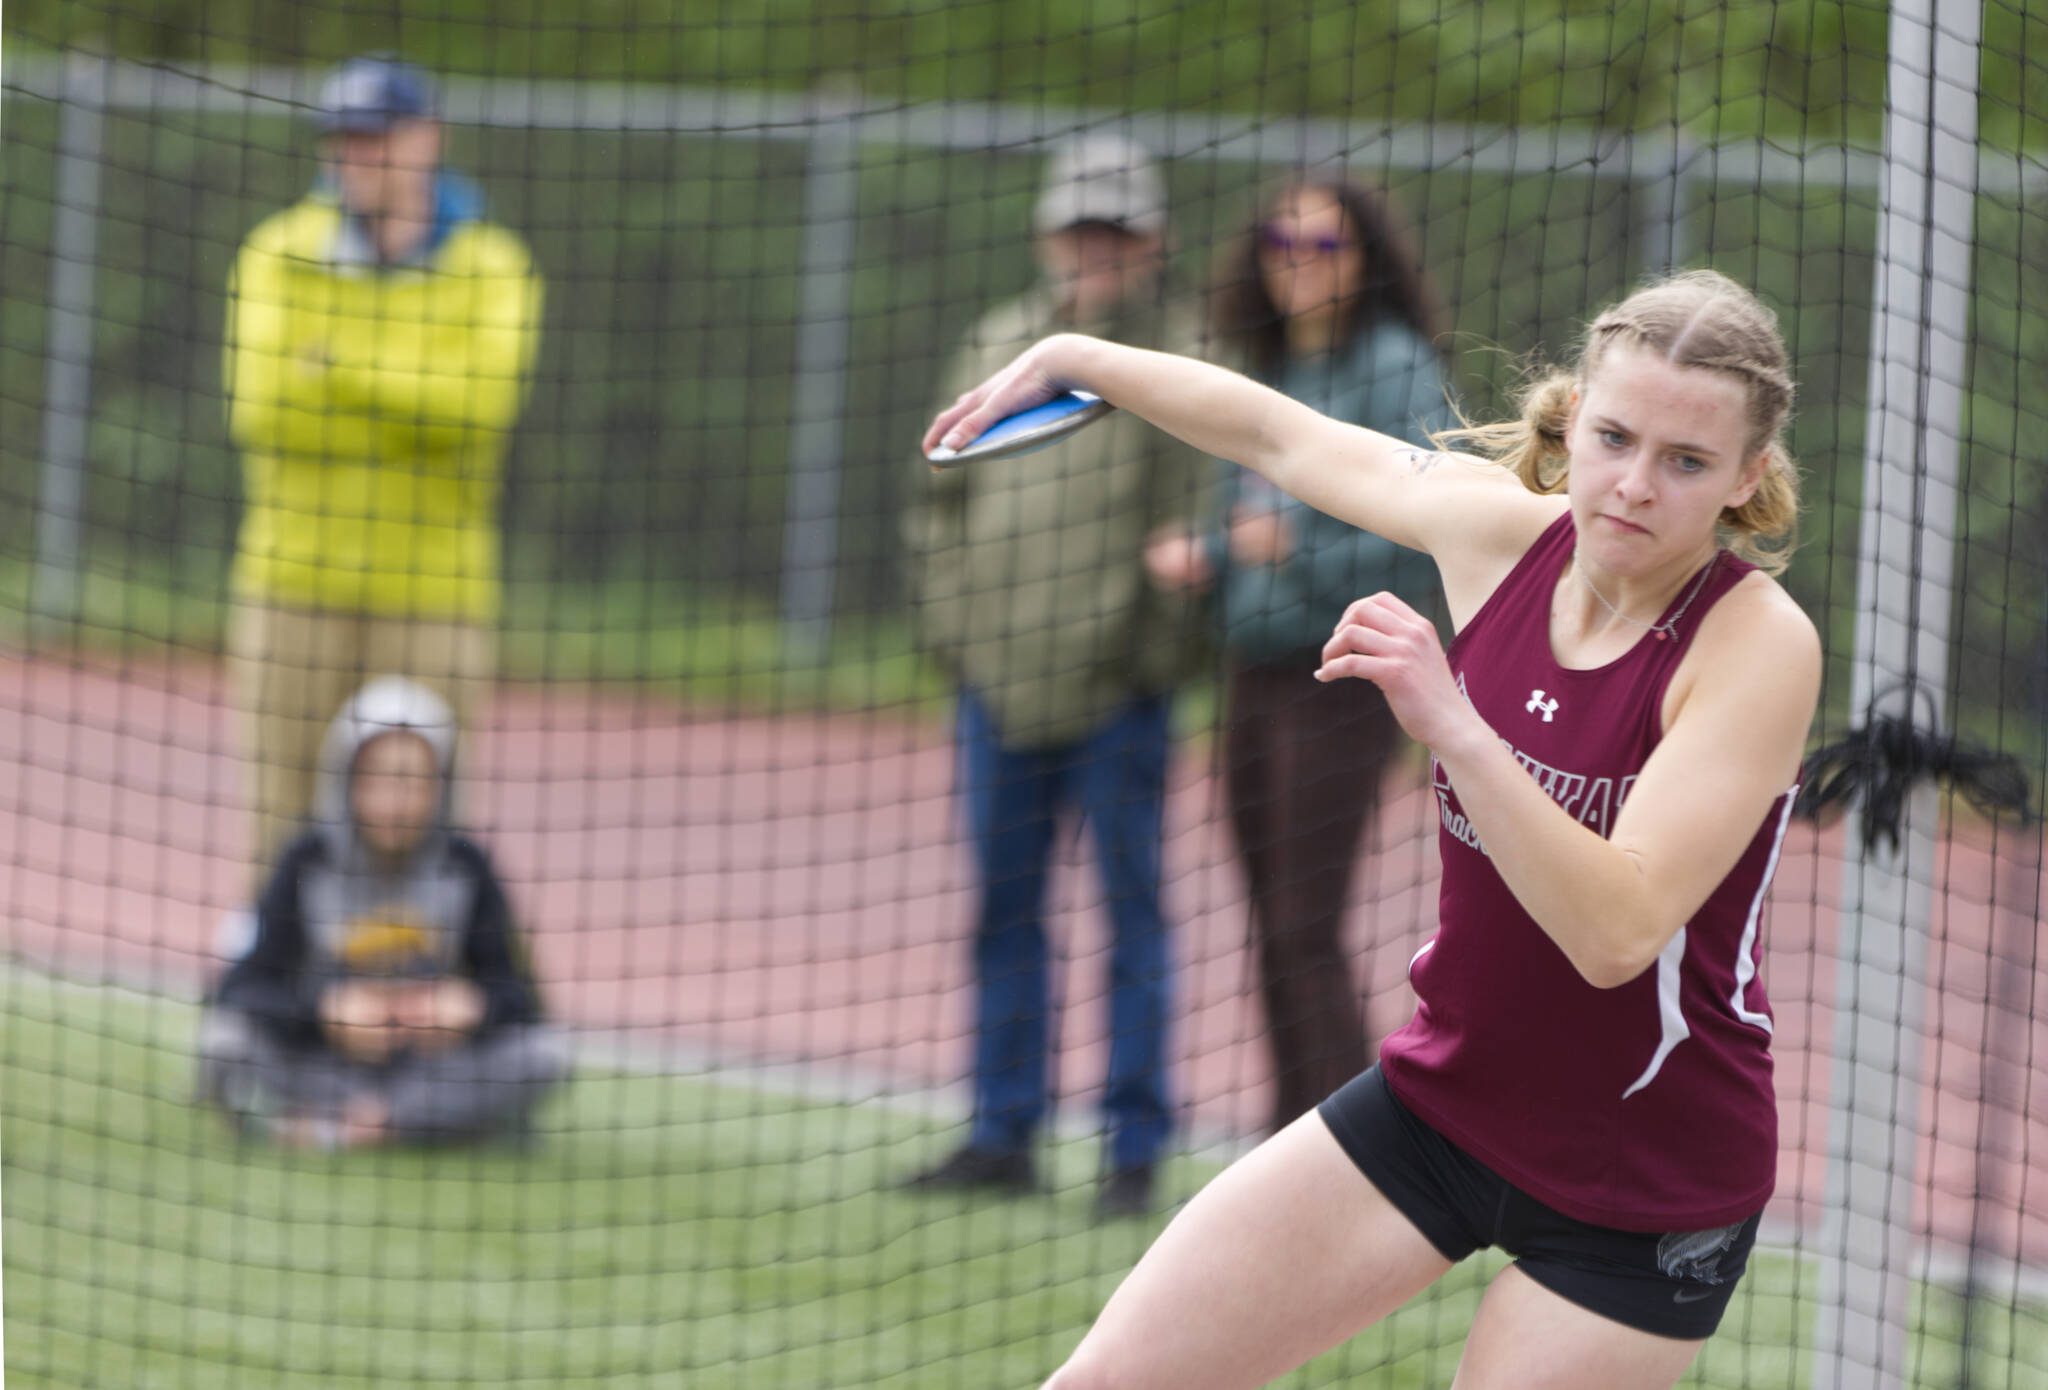 Julia Biagi, a Kayhi junior, gets ready to send a discus on an over 80-foot trip Saturday. Biagi took first place in discus for Division I girls with a distance of 84 feet and 10.5 inches. (Ben Hohenstatt / Juneau Empire)